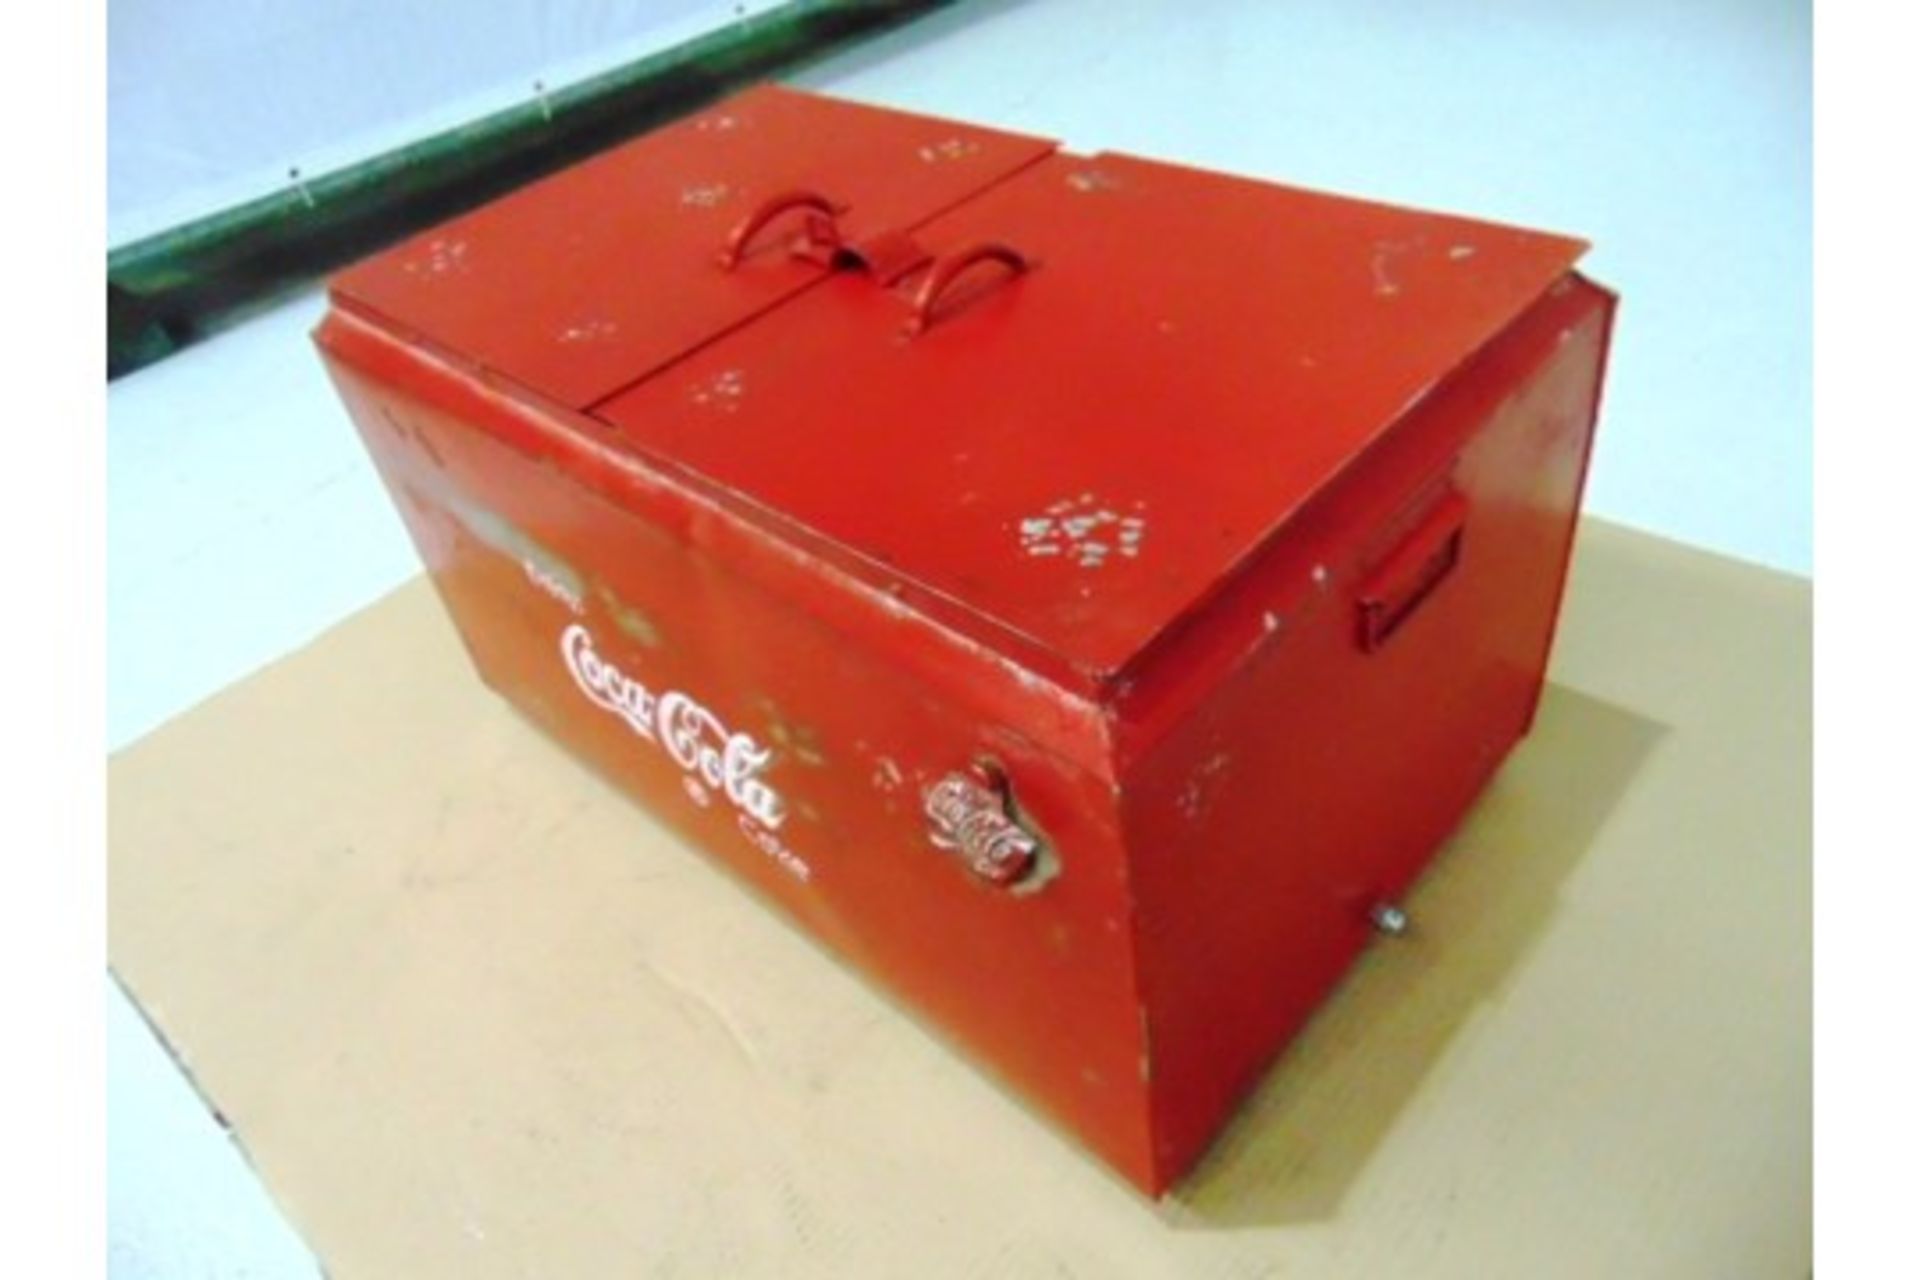 Vintage Coca Cola Double Cooler / Ice Box repro with period bottle opener. - Image 2 of 7